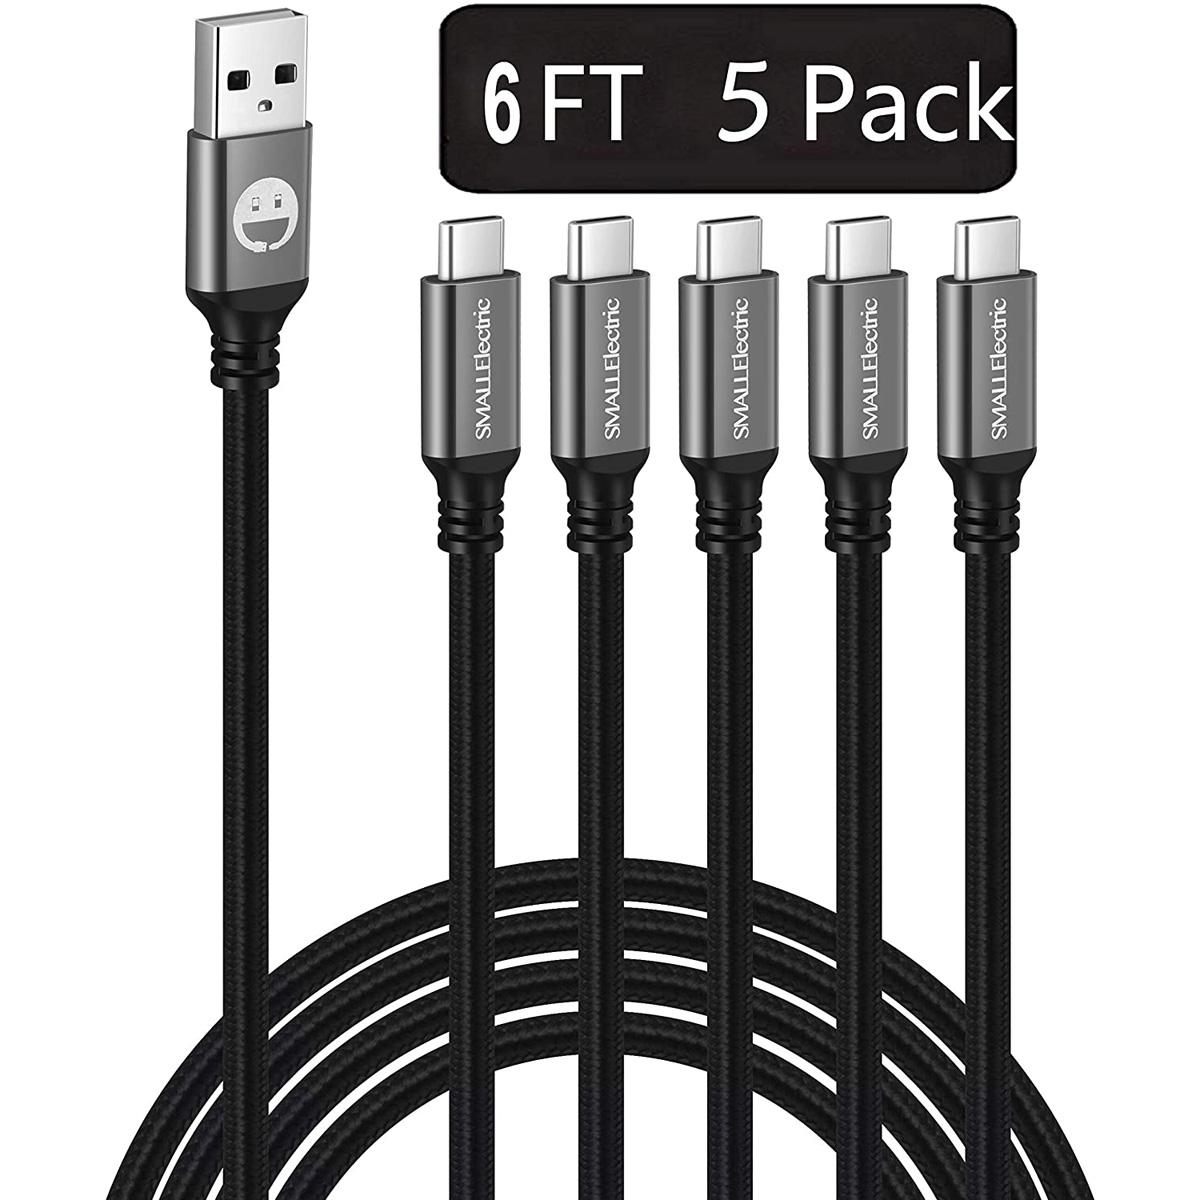 5 SmallElectric USB Type-C to A Braided Charging Cable for $6.59